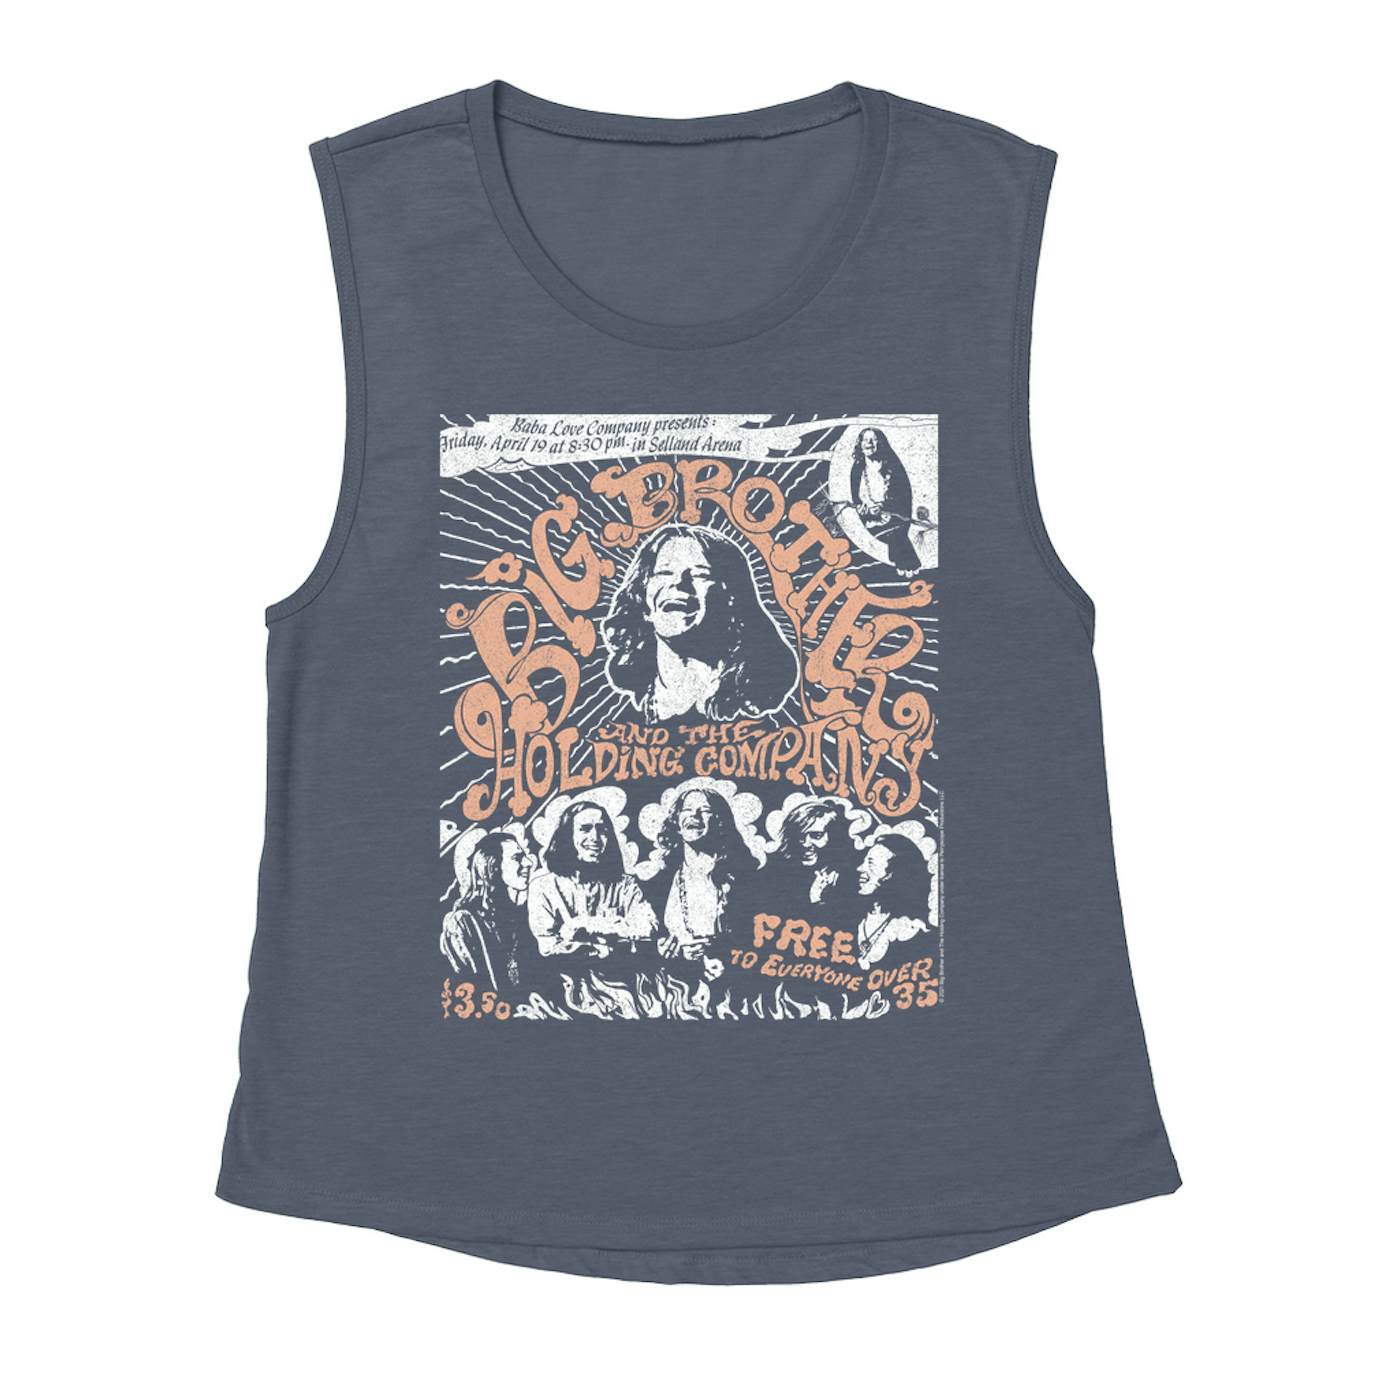 Big Brother & The Holding Company Big Brother and The Holding Co. Ladies' Muscle Tank Top | Featuring Janis Joplin Fresno Concert Flyer Big Brother and The Holding Co. Shirt